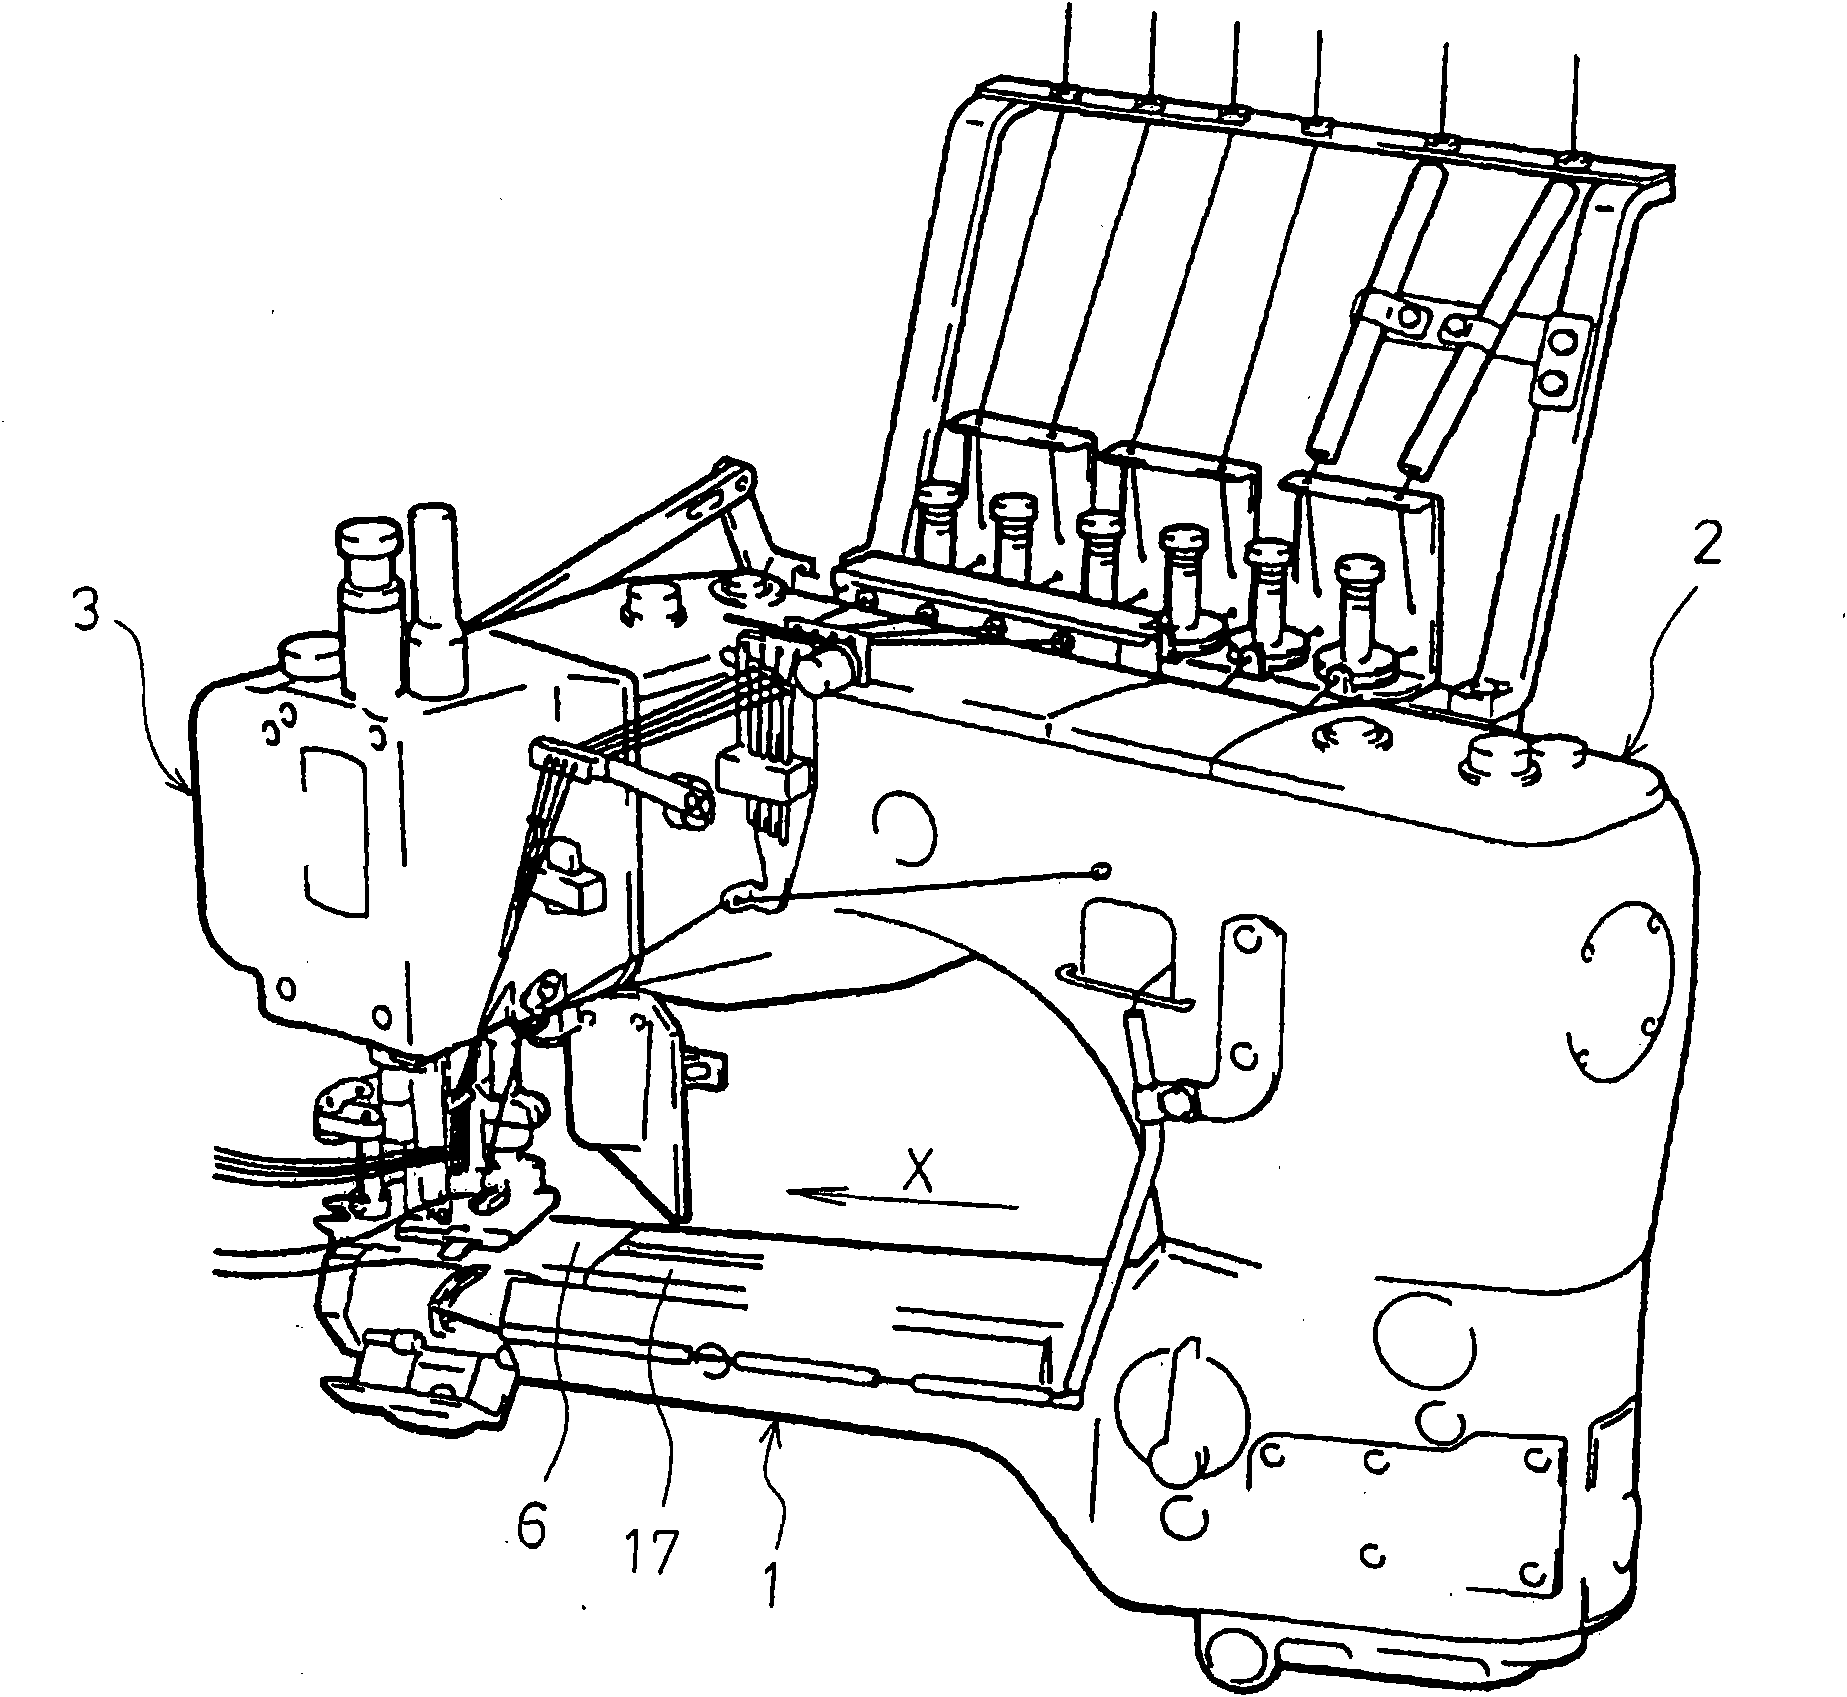 Arm out type sewing machine